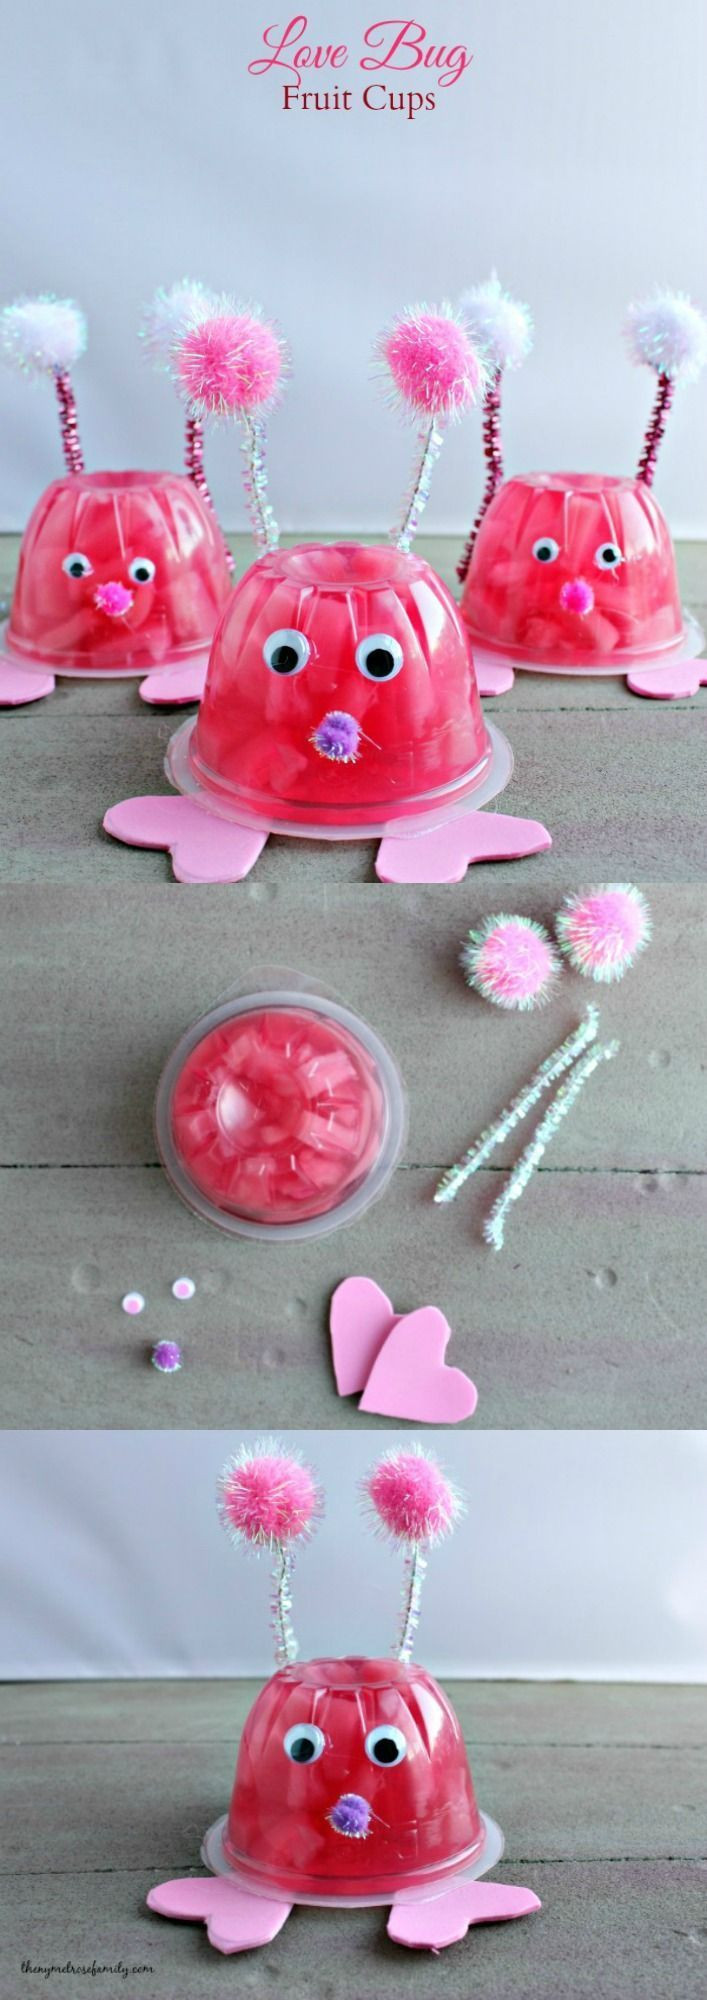 Valentines Gift Ideas For Kids
 Valentines Day Ideas for Kids Love Bug Fruit Cups